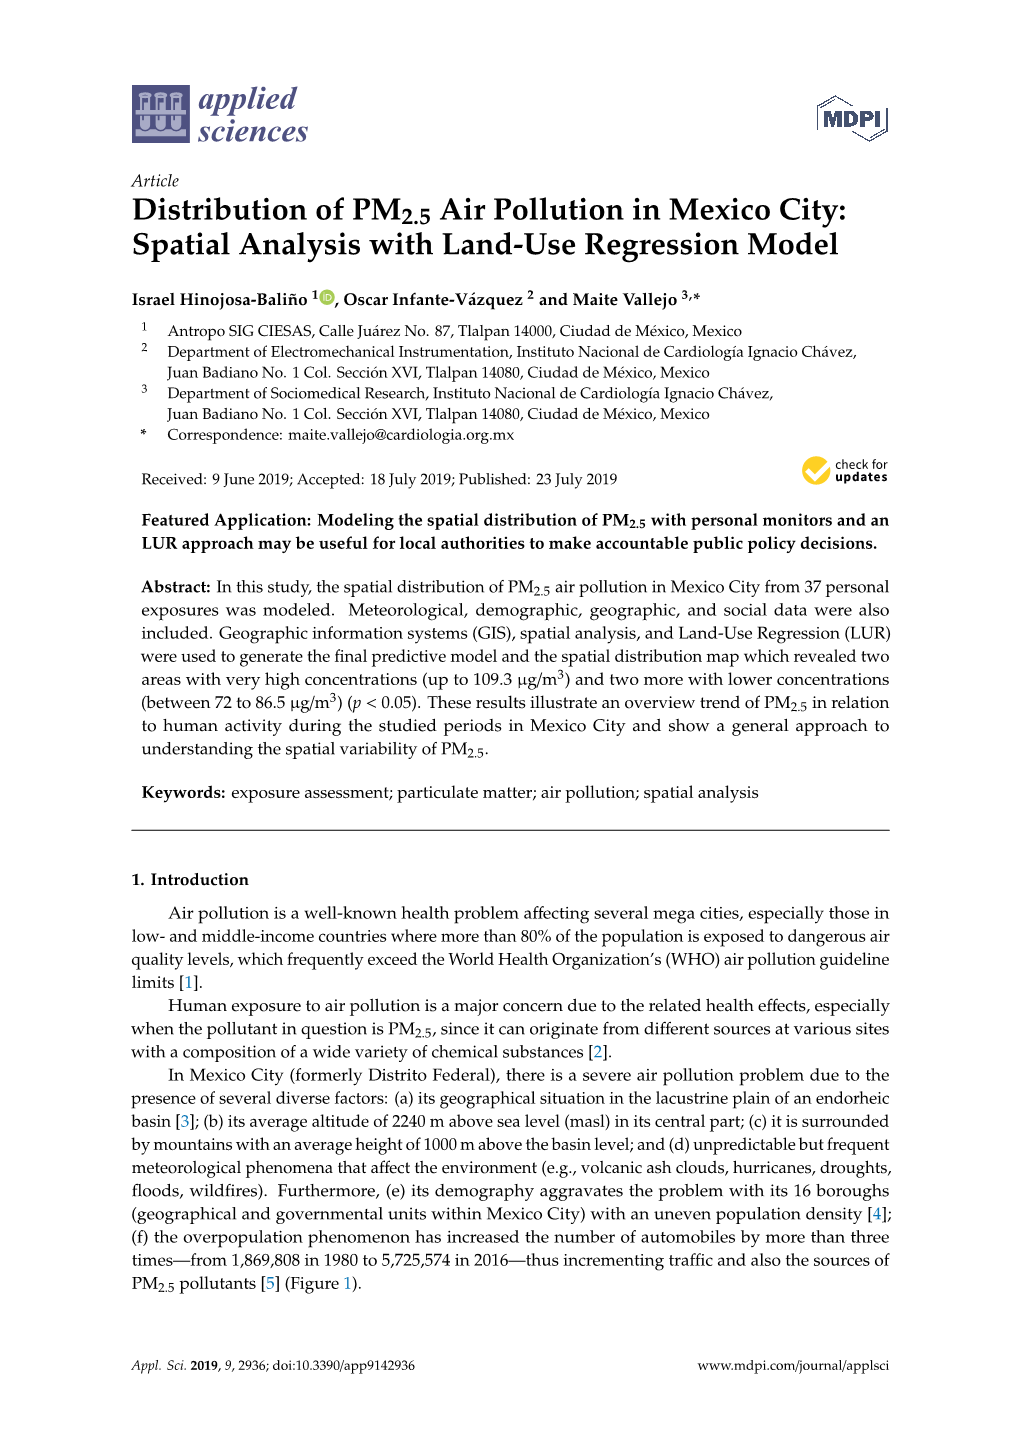 Distribution of PM2.5 Air Pollution in Mexico City: Spatial Analysis with Land-Use Regression Model